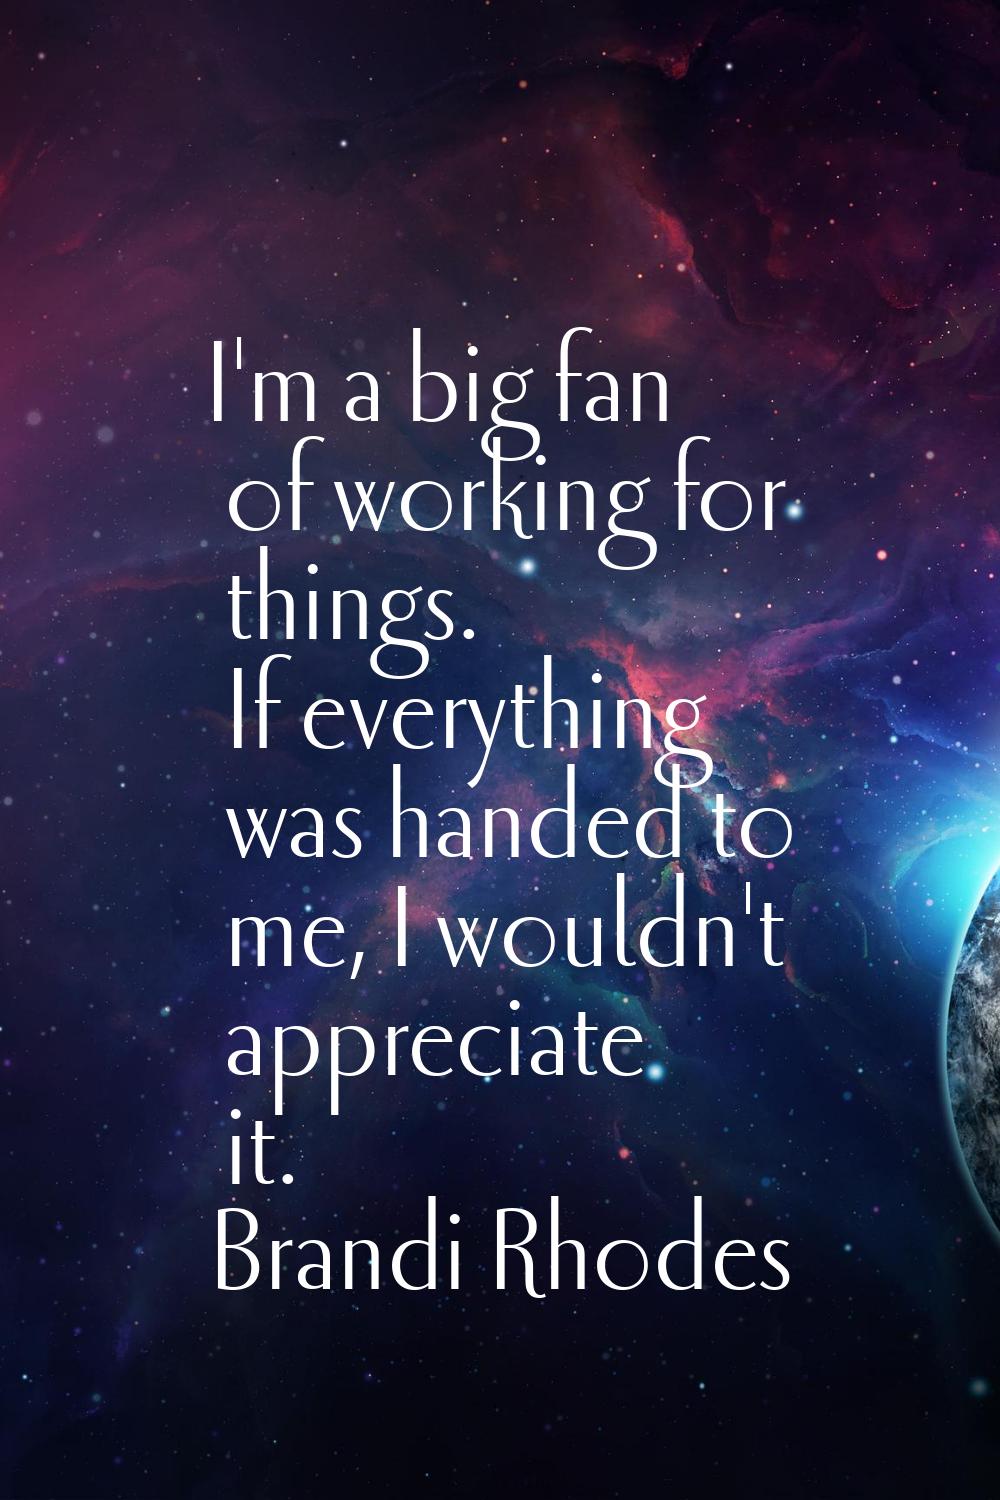 I'm a big fan of working for things. If everything was handed to me, I wouldn't appreciate it.